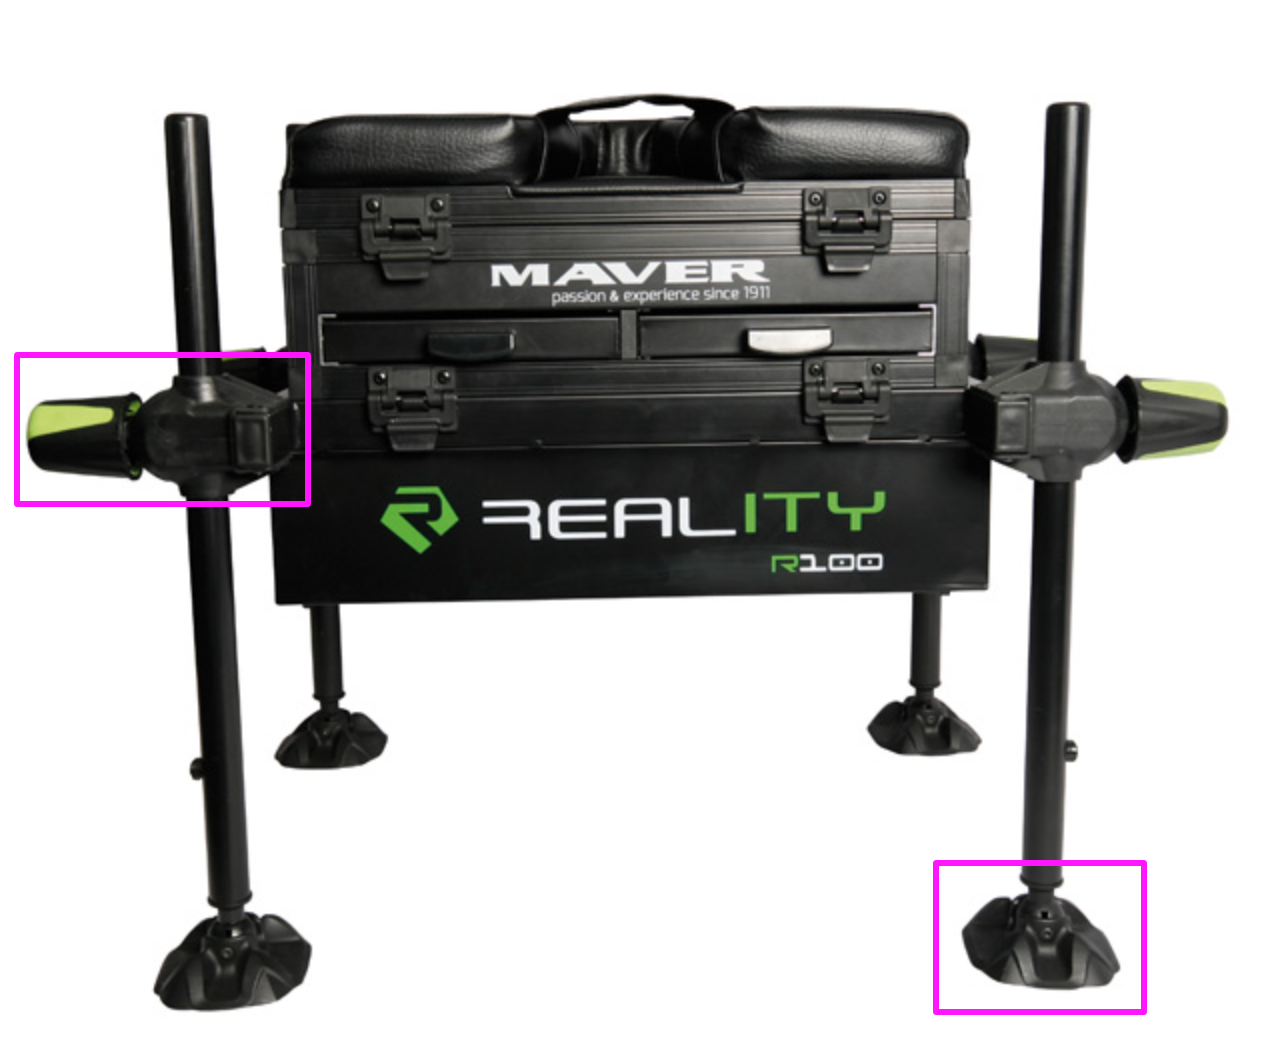 Maver R100 product image highlighting the adjustable legs and feet